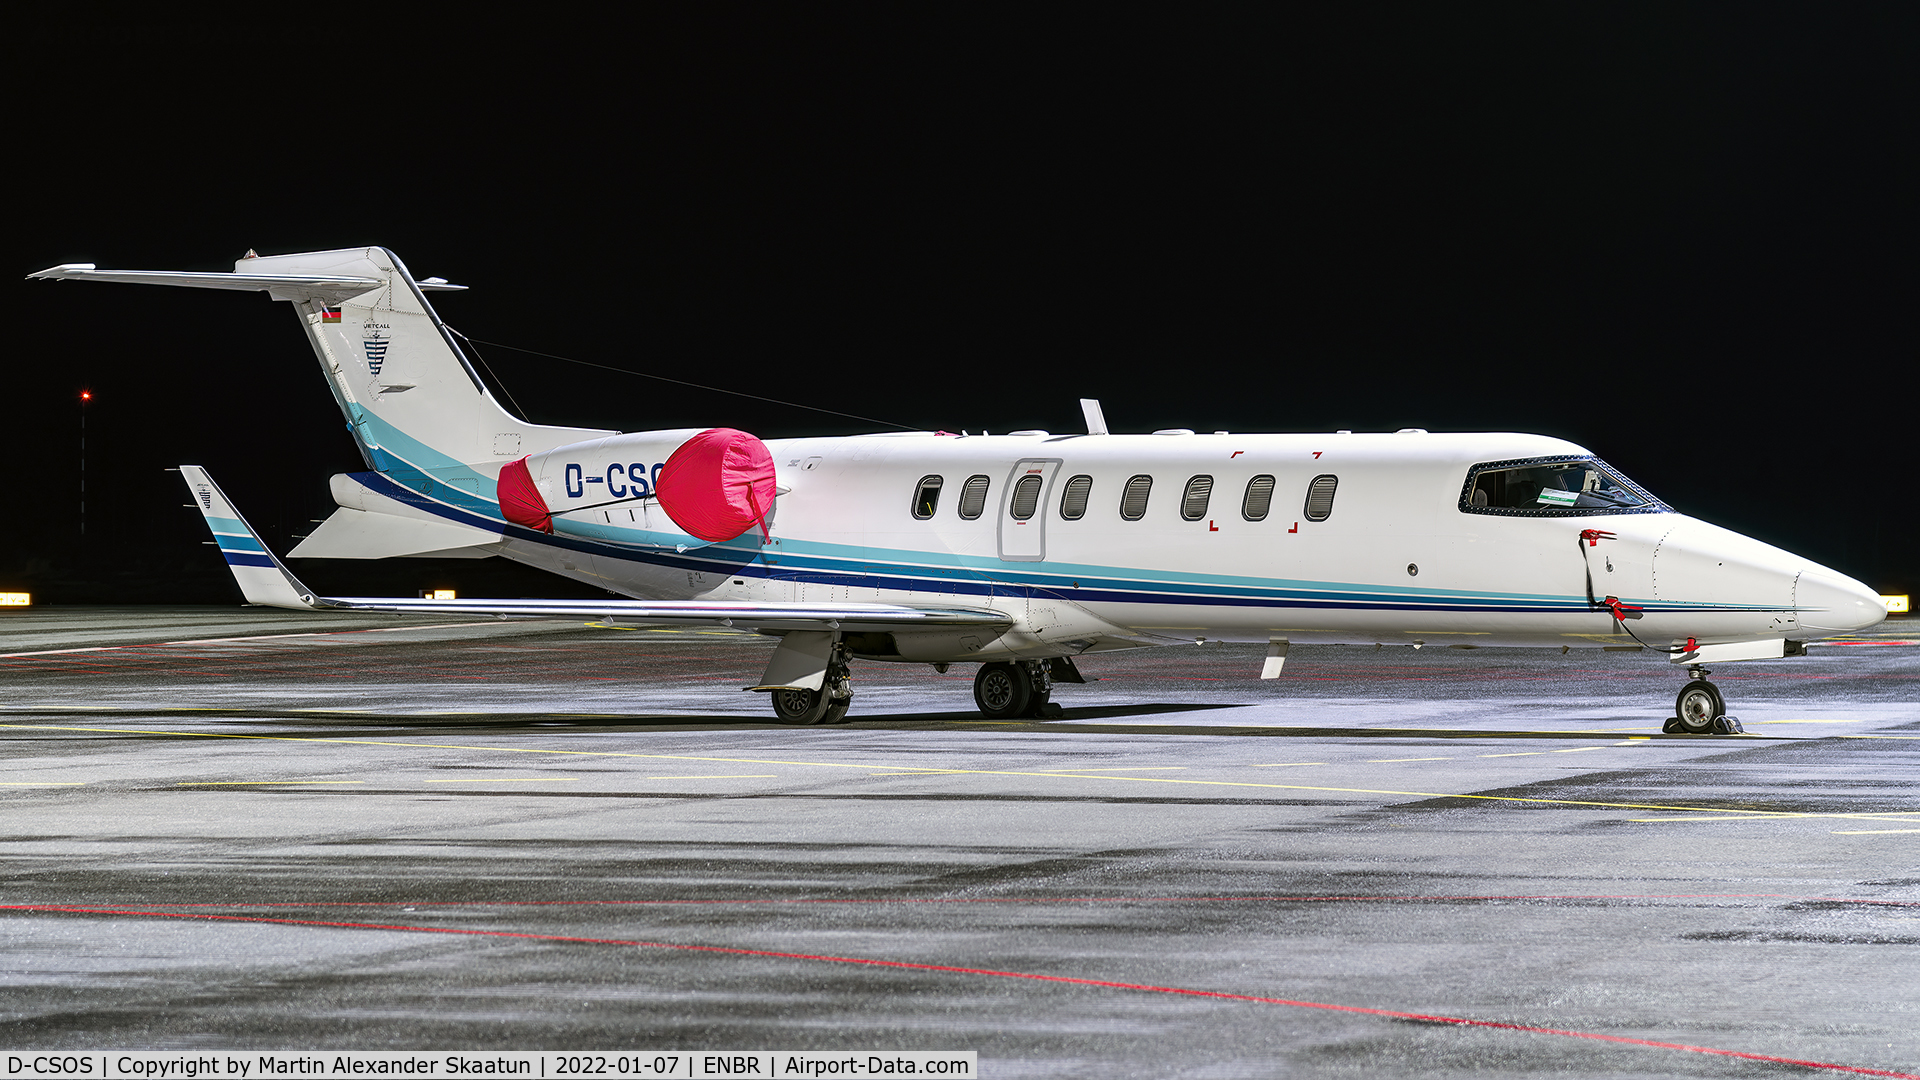 D-CSOS, 2001 Learjet 45 C/N 45-161, Parked overnight at stand 46.